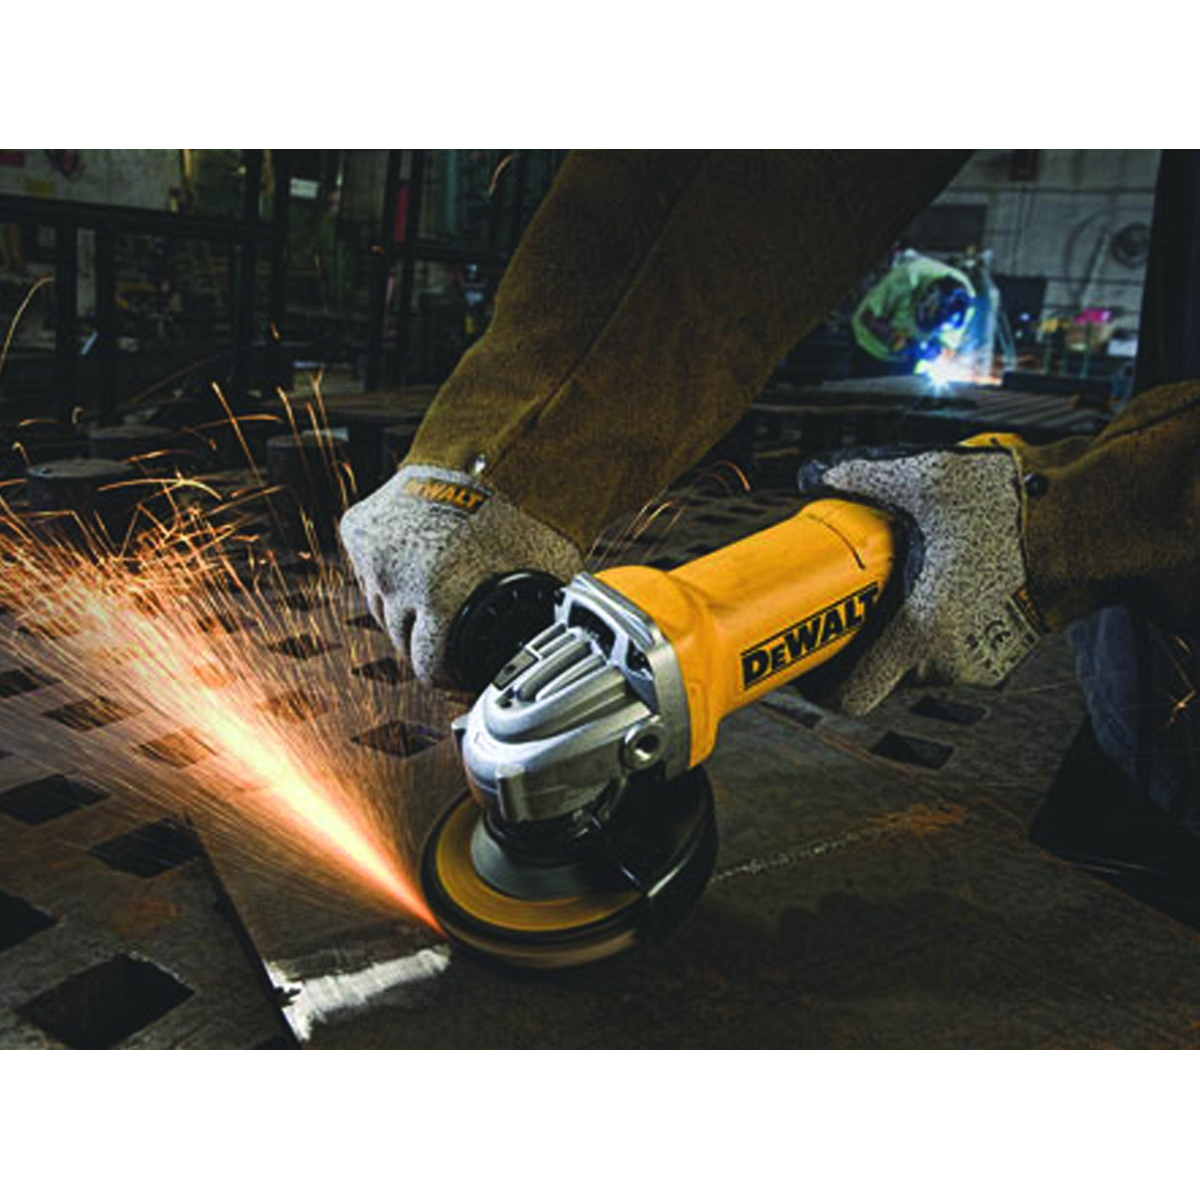 DeWALT DWE402 Small Angle Grinder, 11 A, 5/8-11 Spindle, 4-1/2 in Dia Wheel, 11,000 rpm Speed - 9